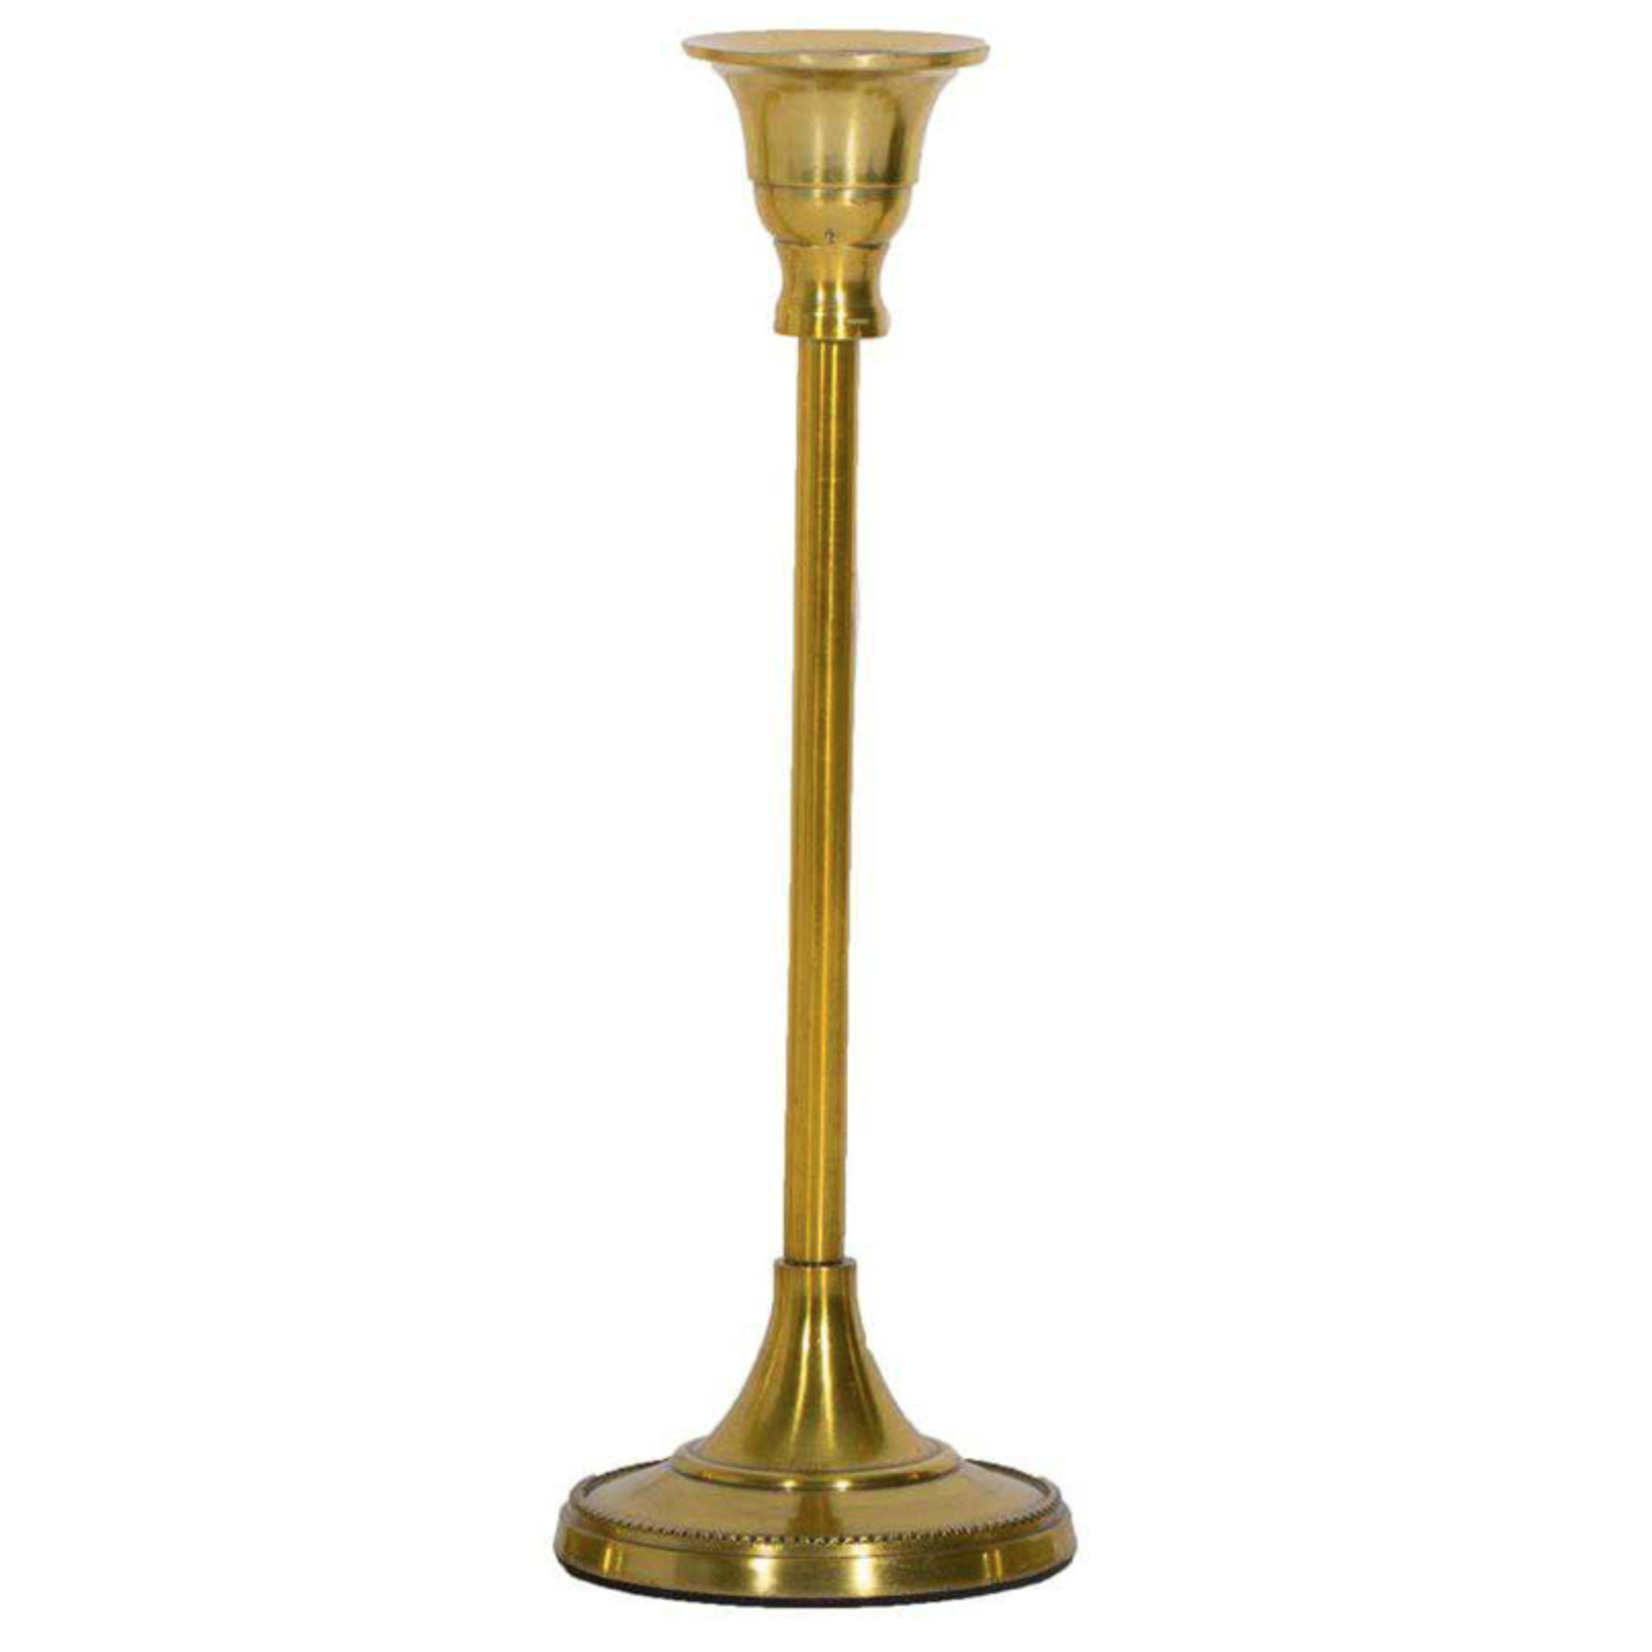 9”H X 3” GOLD METAL TAPER CANDLE HOLDER